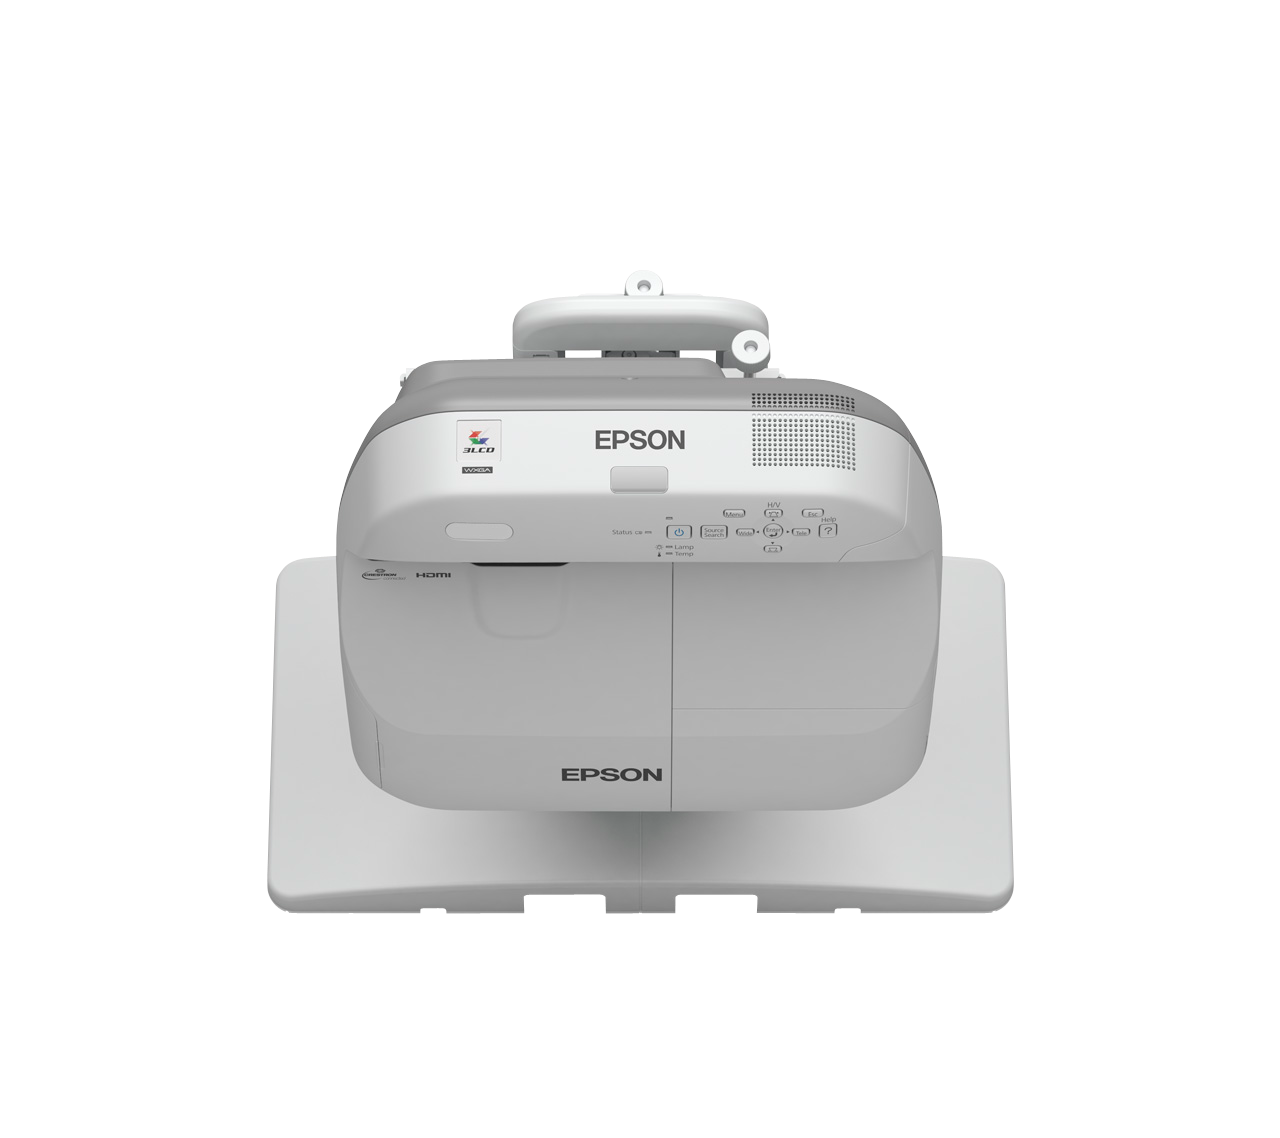 EB-580 | Ultra Short Distance | Projectors | Products | Epson Europe